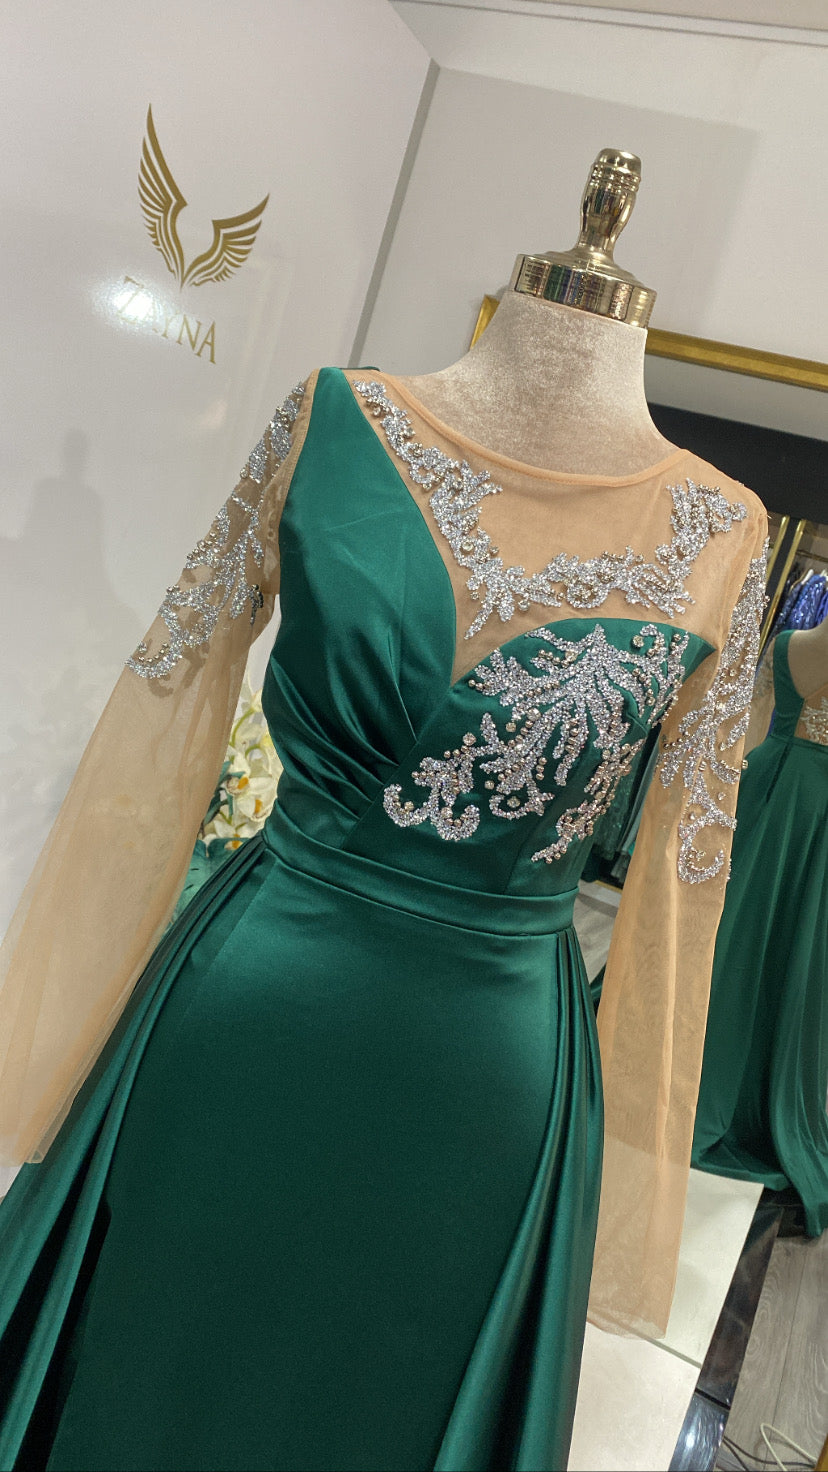 Elegant green dress decorated front back and sleeves and long veil